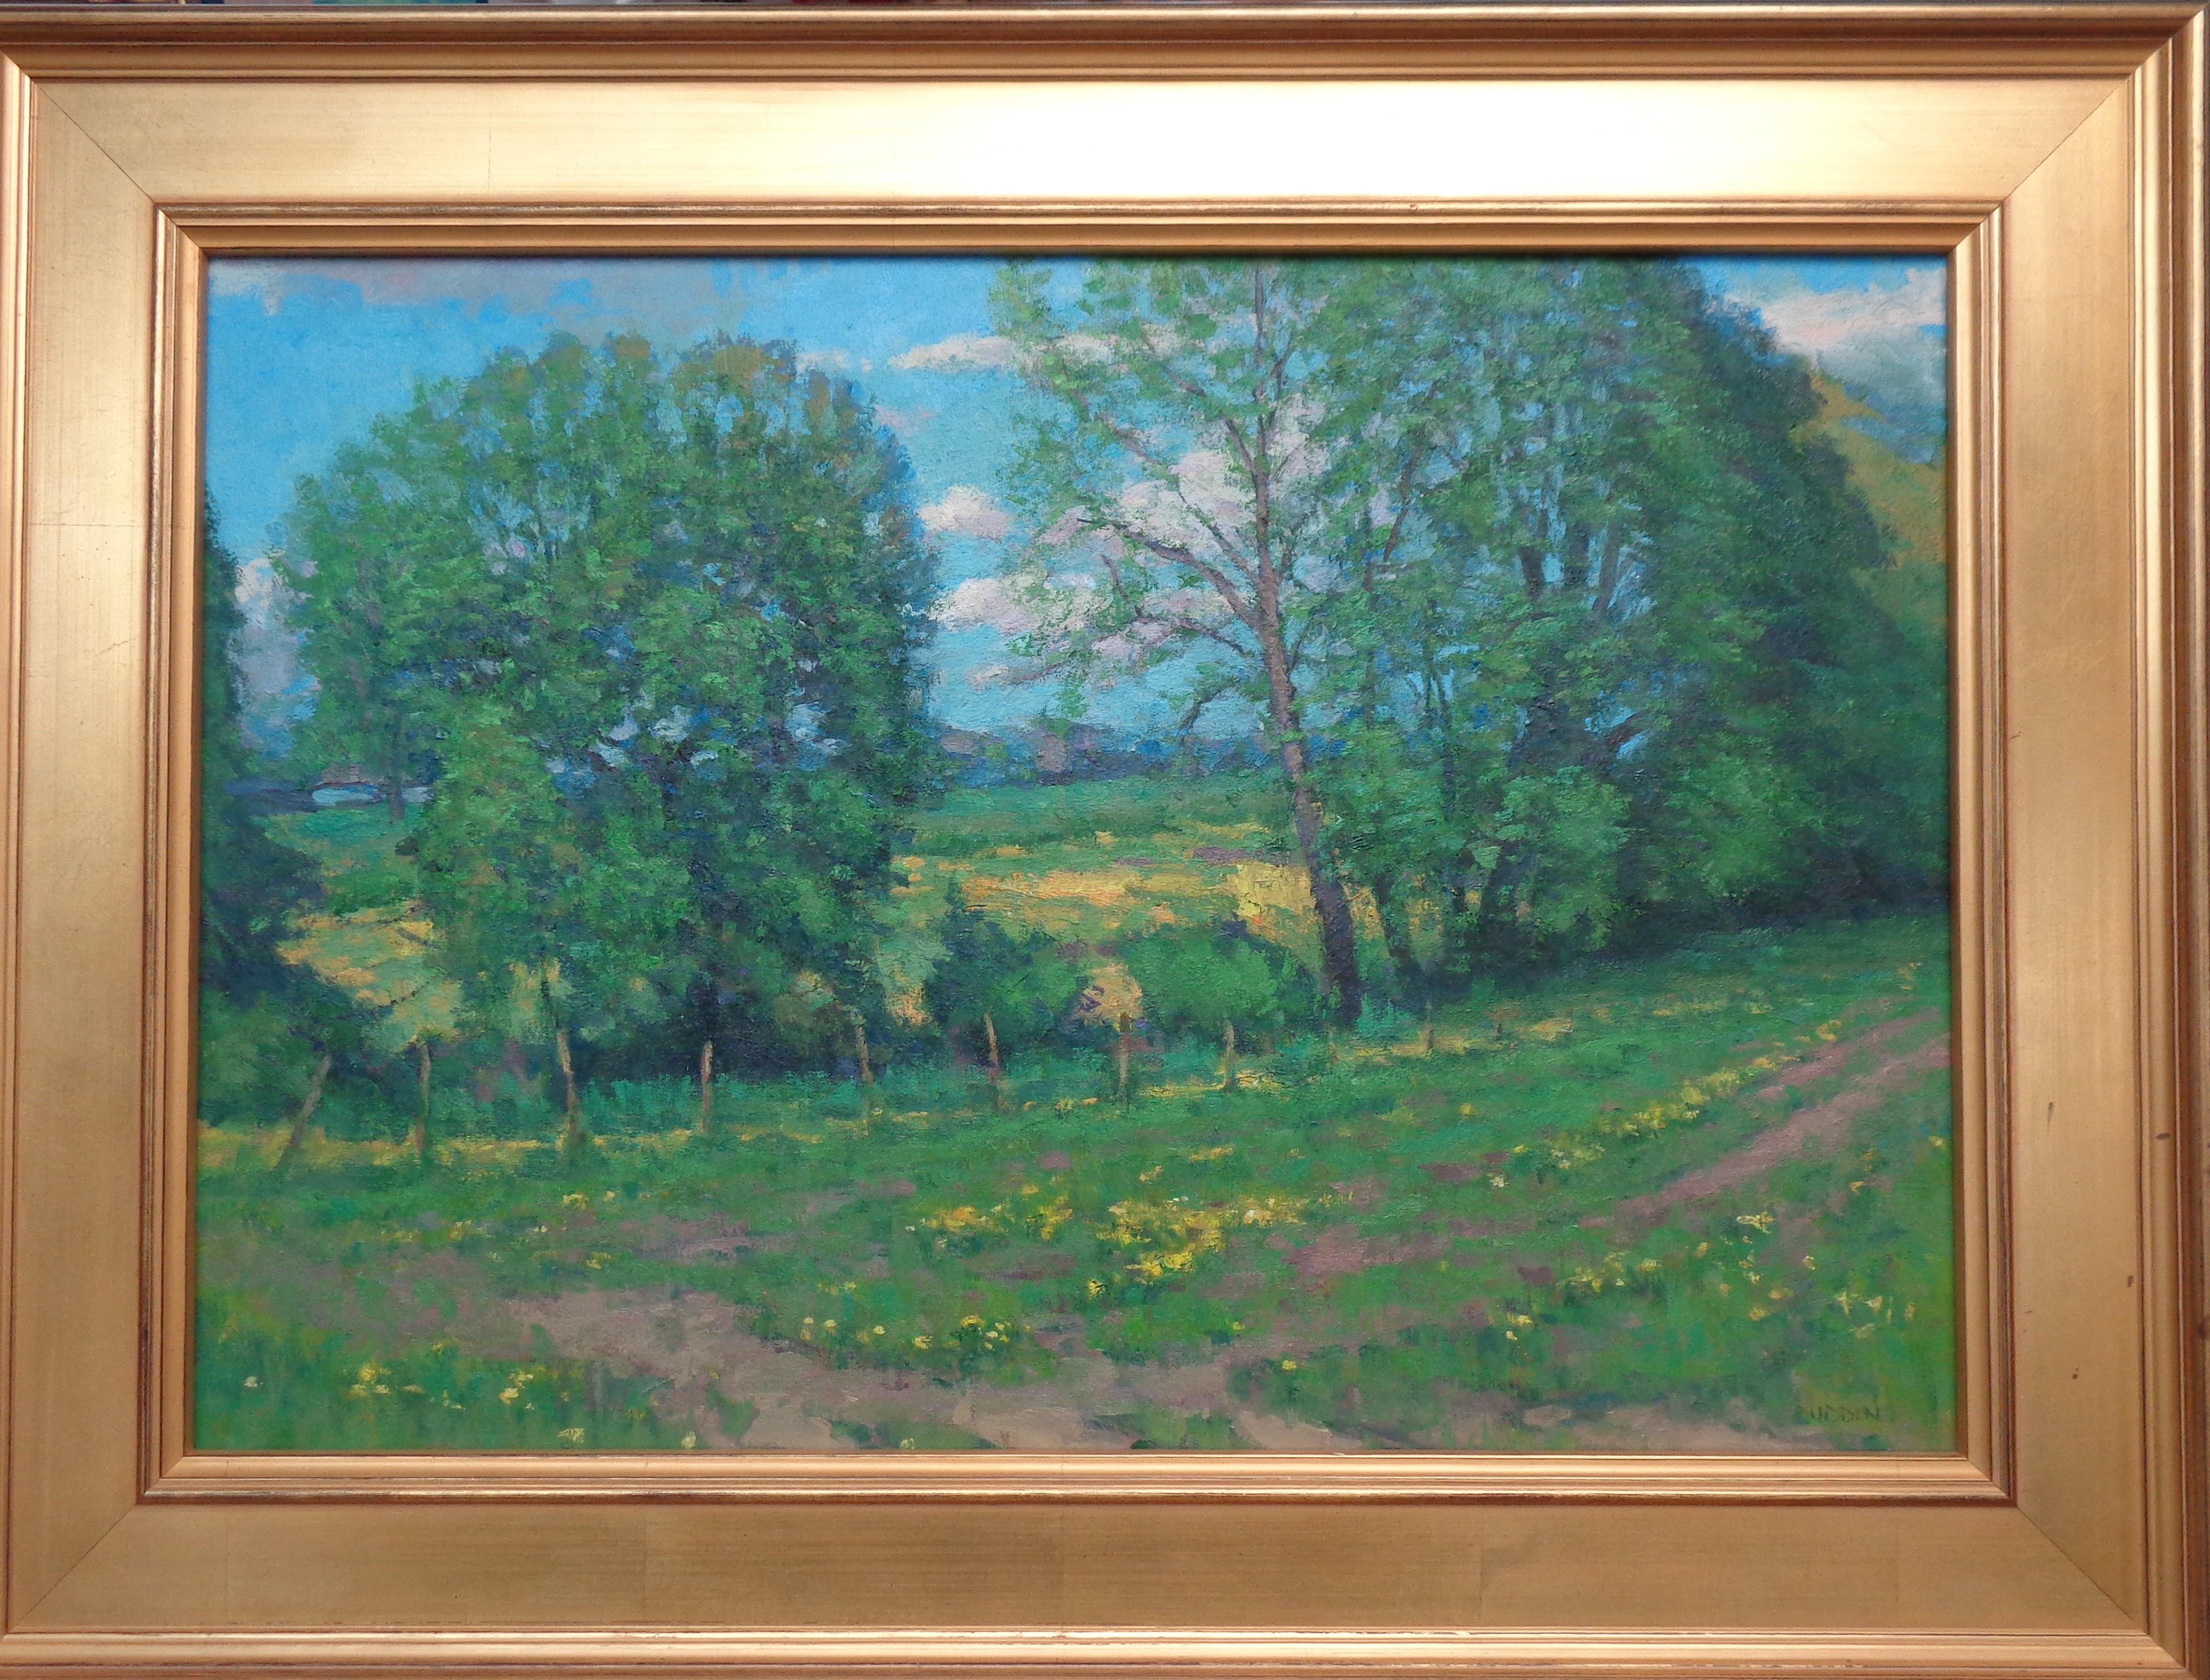 Glorious Spring
oil/canvas 18 x 26 image
24 x 32 1/4 framed, is an impressionistic landscape oil painting on canvas that showcases a beautiful early spring farm  scene near my home where I often paint. This painting exudes the rich qualities of oil